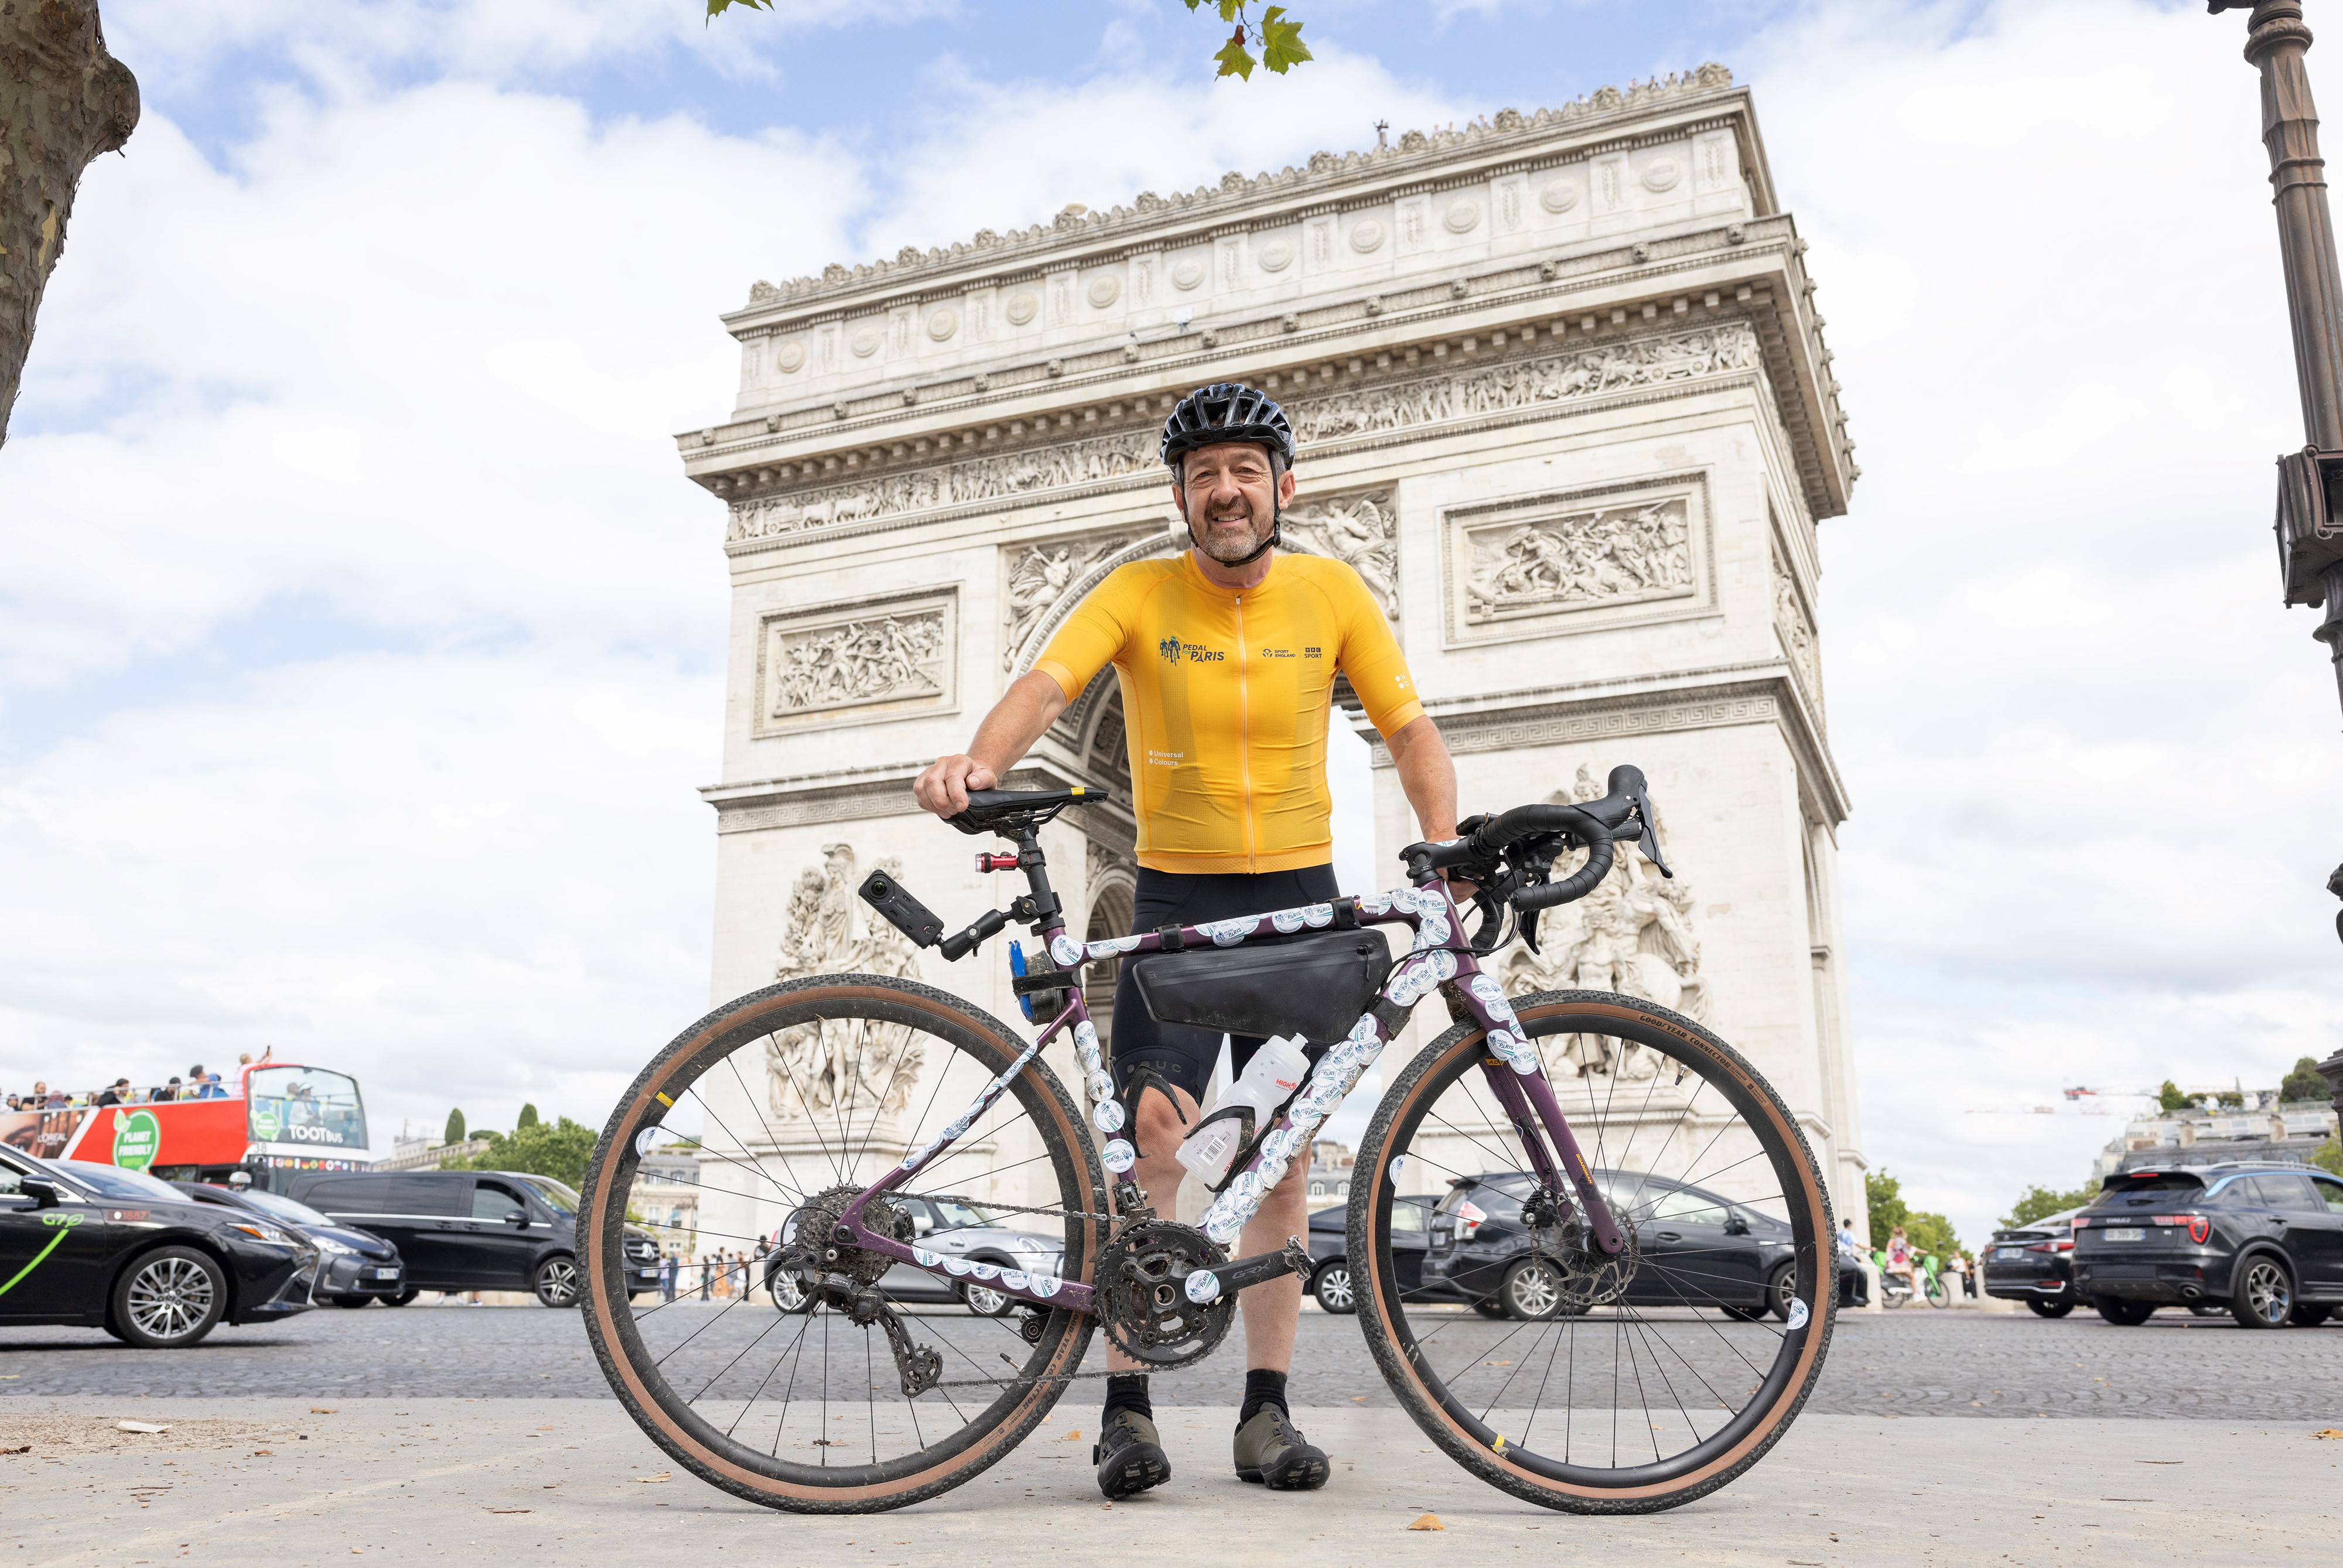 Olympic champion Chris Boardman poses with a bike by the Arc de Triomphe in Paris